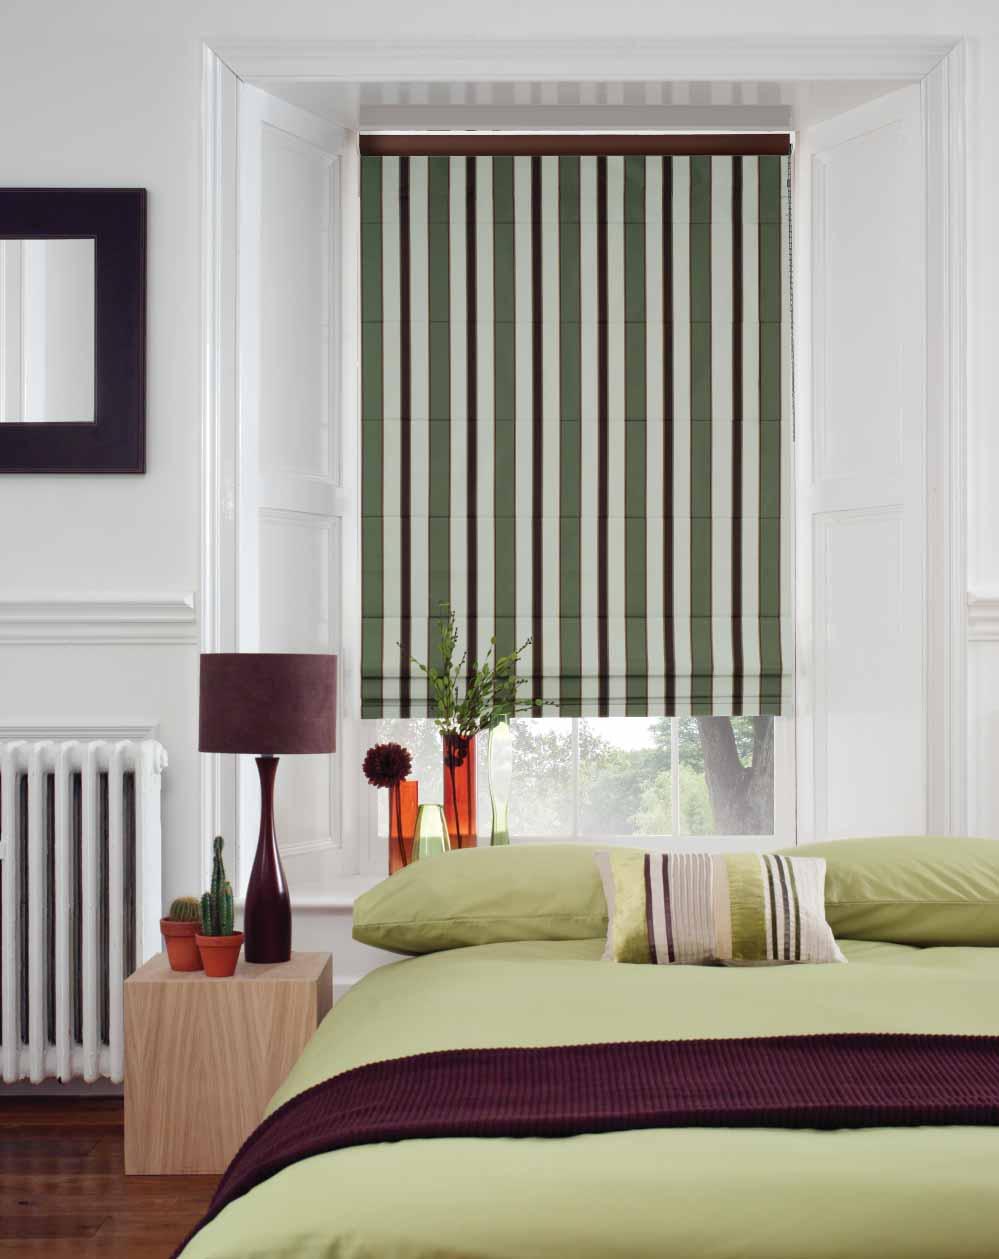 Henley Rum & Raisin Louvolite roman blinds are a recognised child safe product in accordance with BBSA